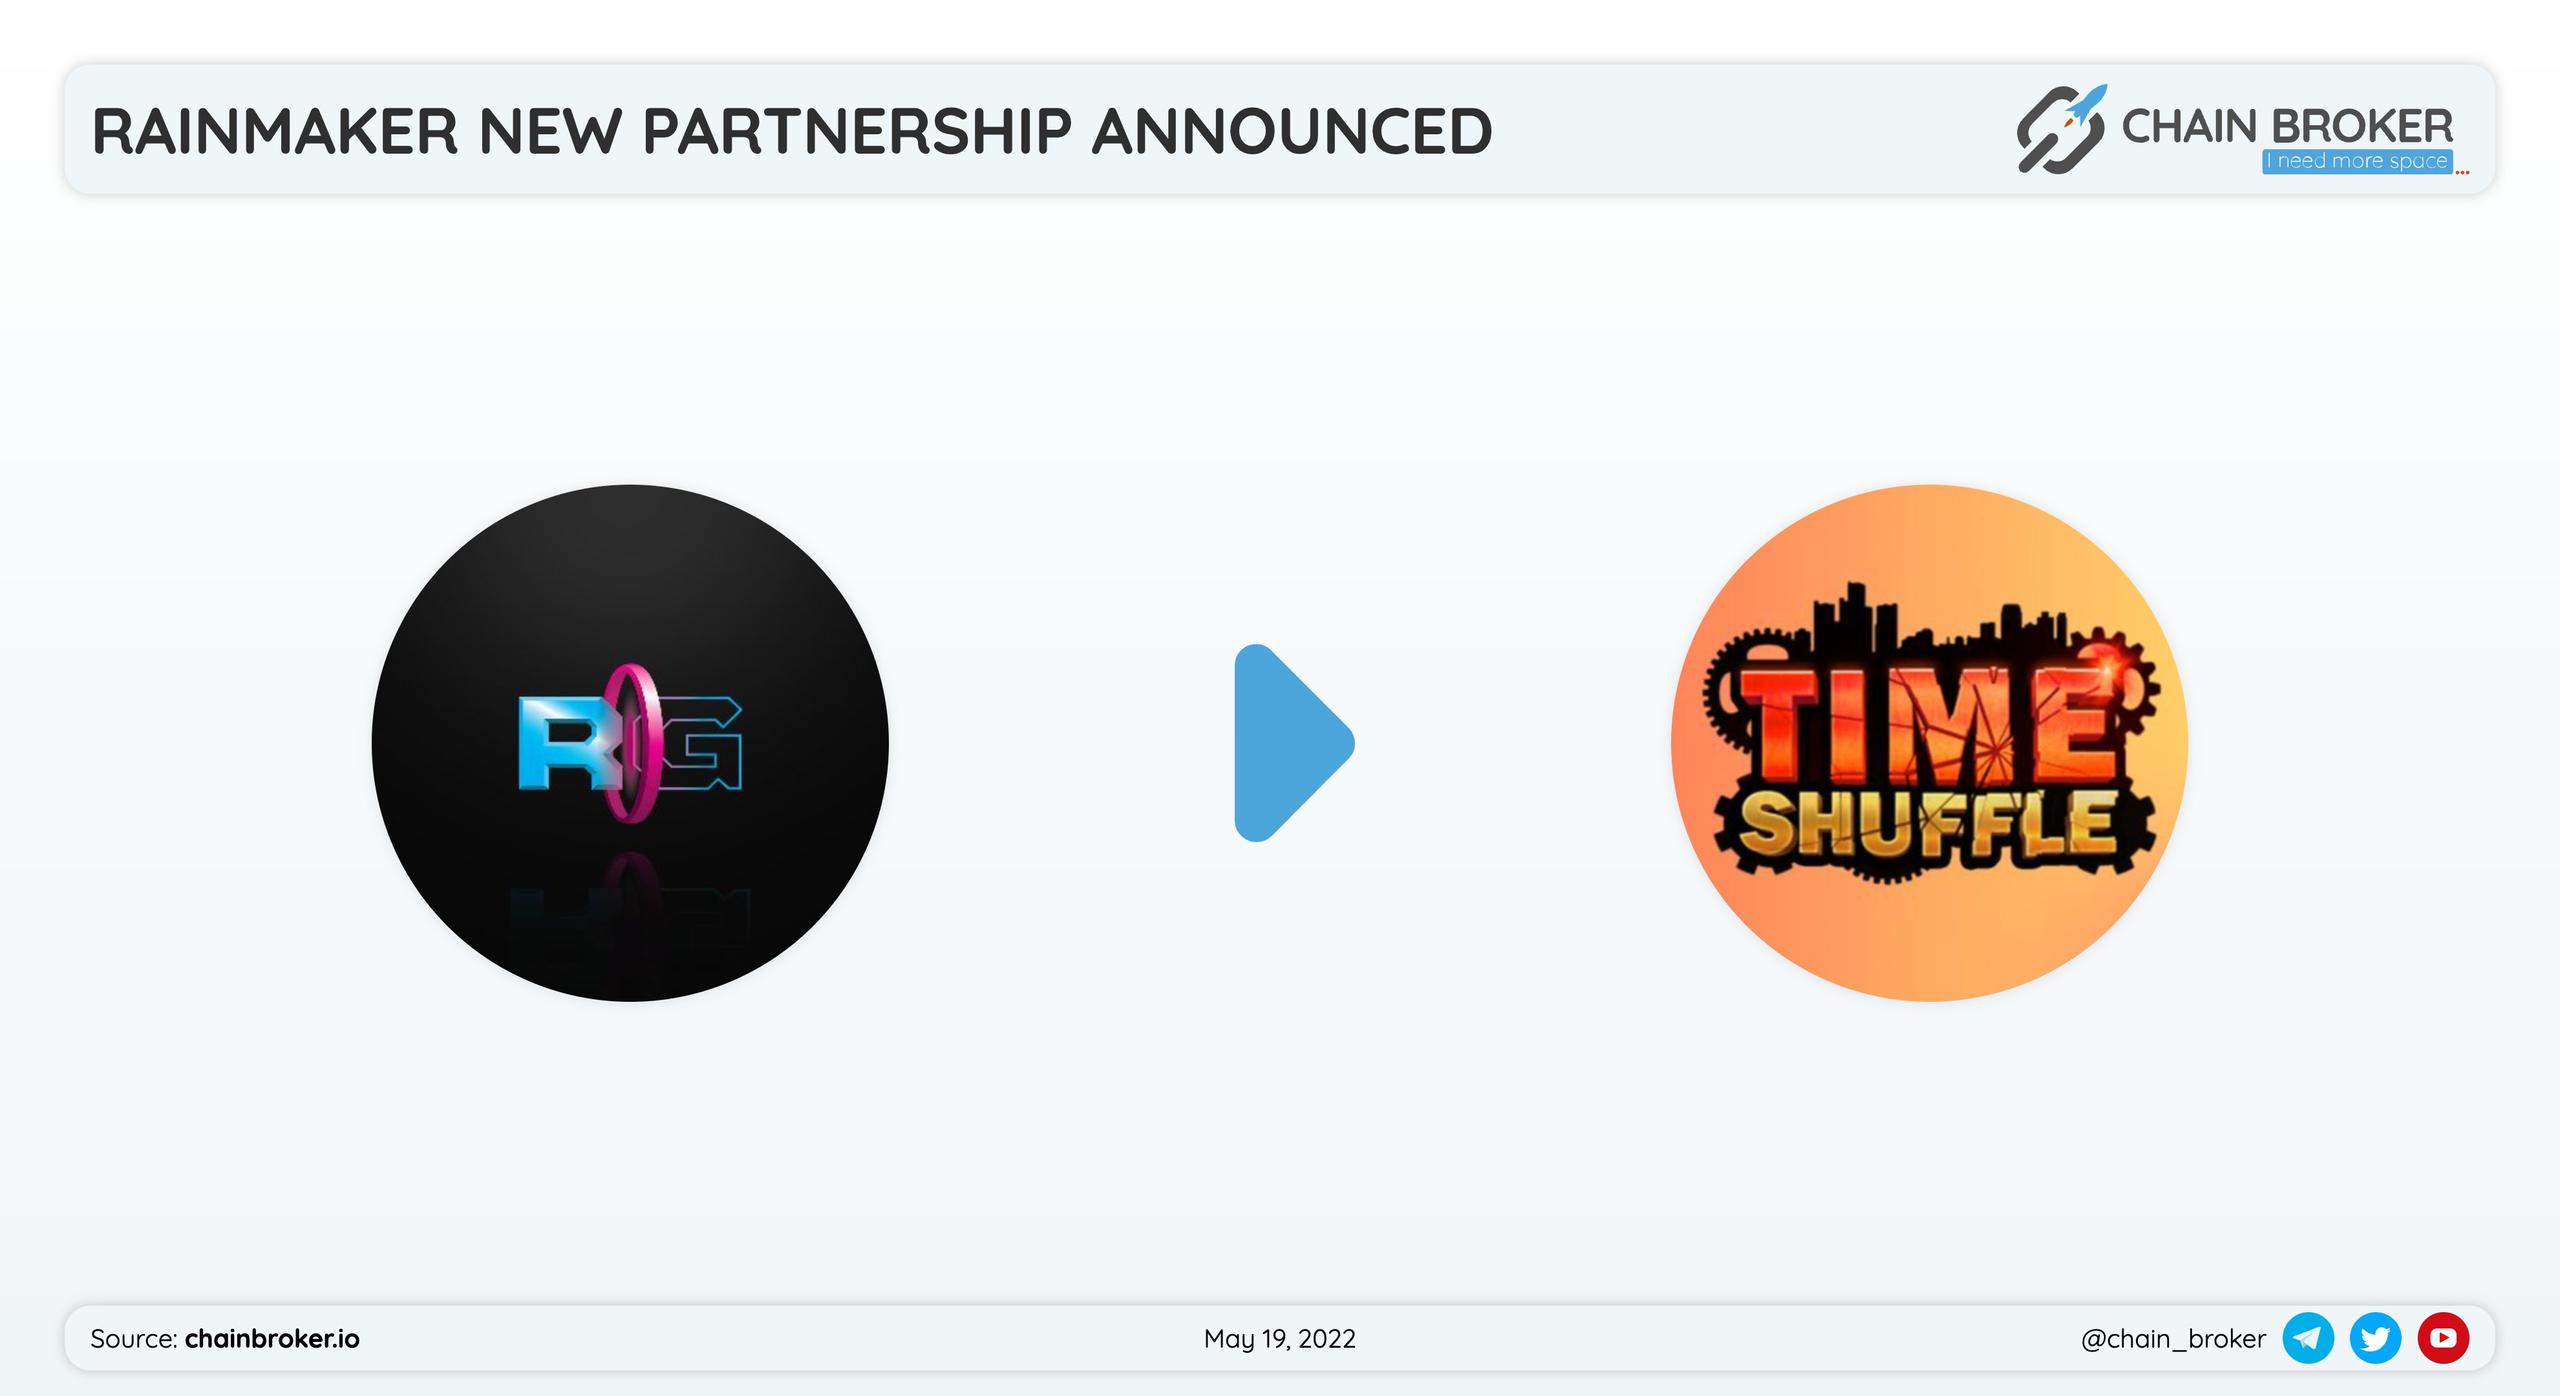 Rainmaker has partnered with TimeShuffle